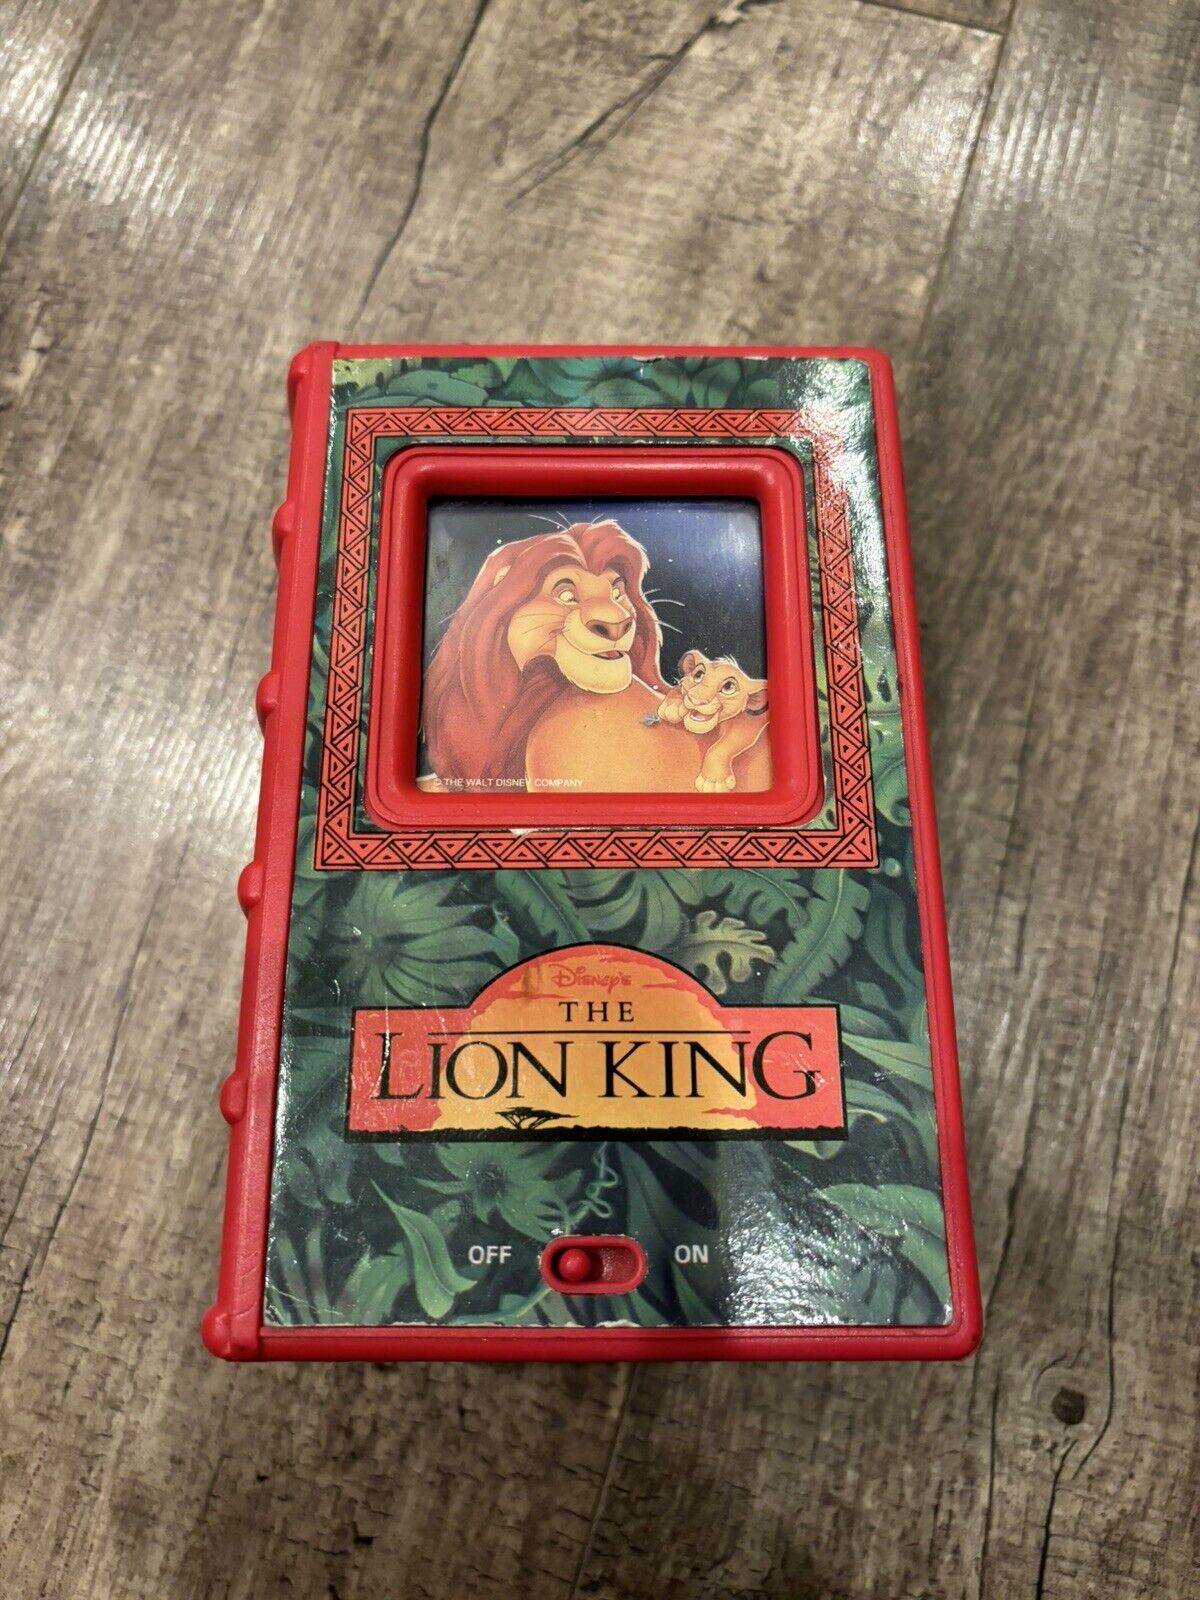 1990’s Lion King Night Light ( Very Rare / Vintage ) Tested & Works Great